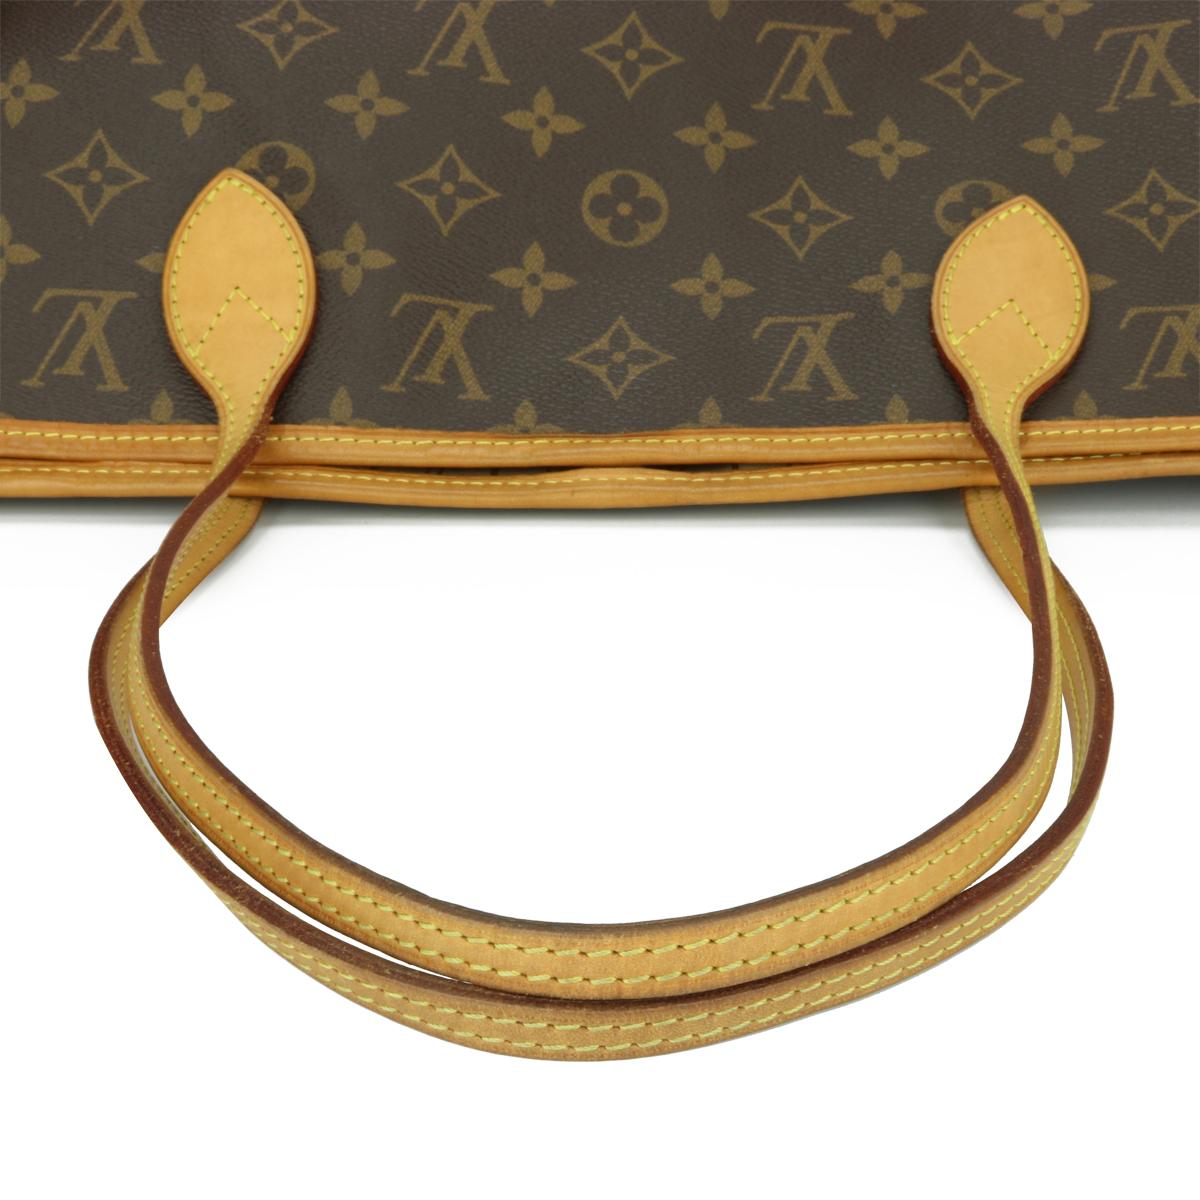 Louis Vuitton Neverfull MM Bag in Monogram with Beige Interior 2016 5